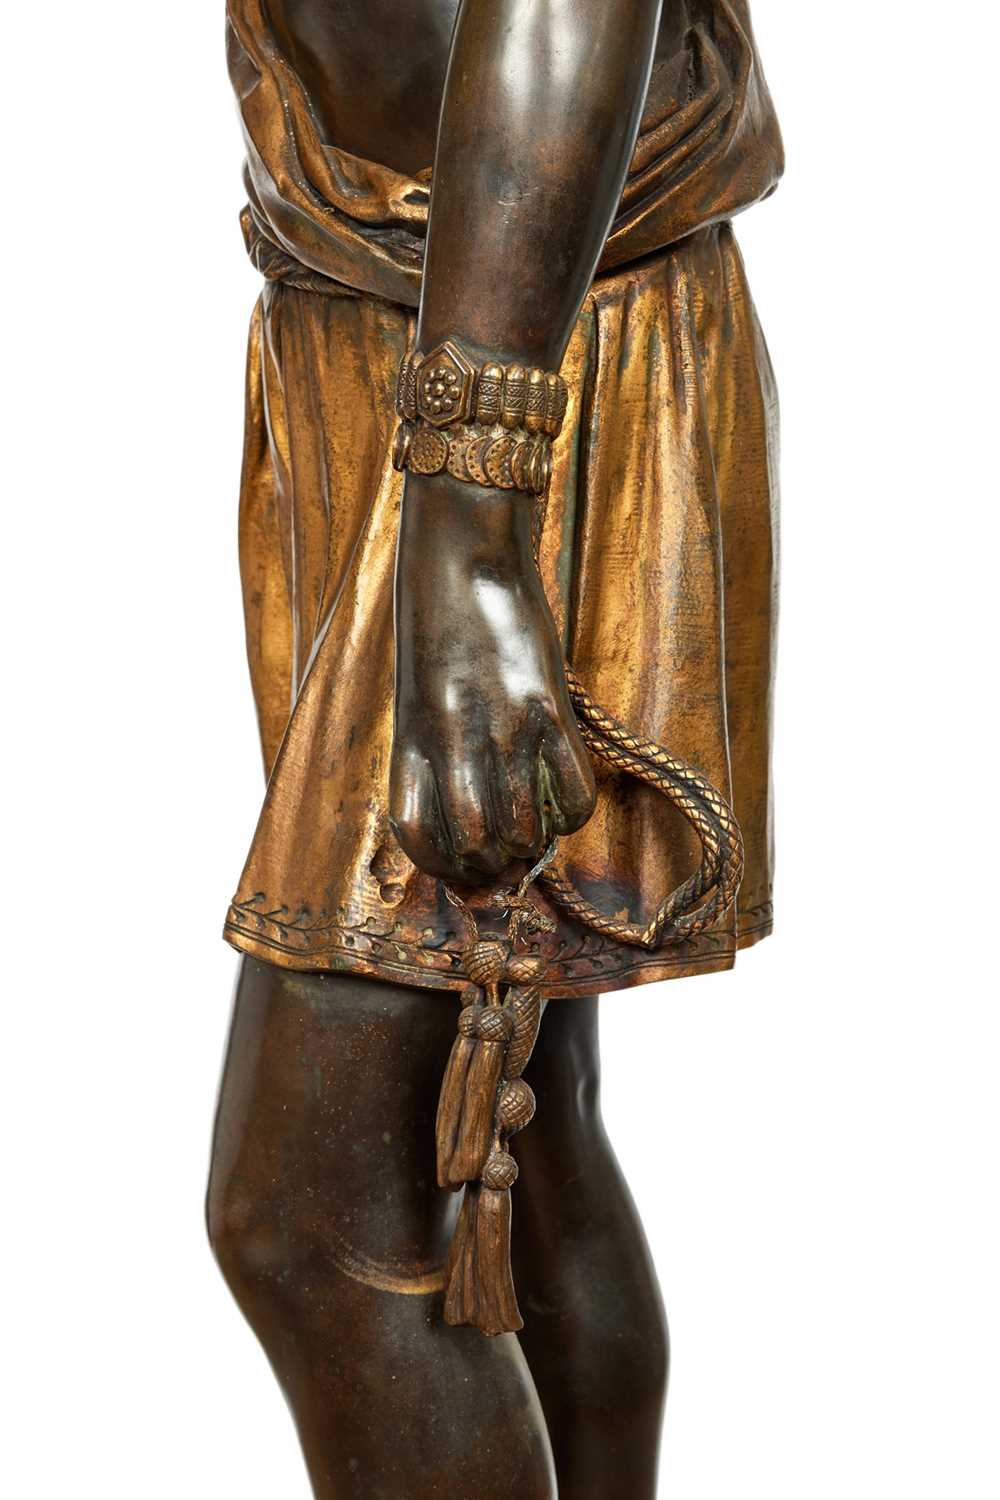 GRAUX-MARLY, PARIS: A 19TH CENTURY LIFE-SIZE ORIENTALIST BRONZE OF A NUBIAN WATER CARRIER - Image 5 of 5